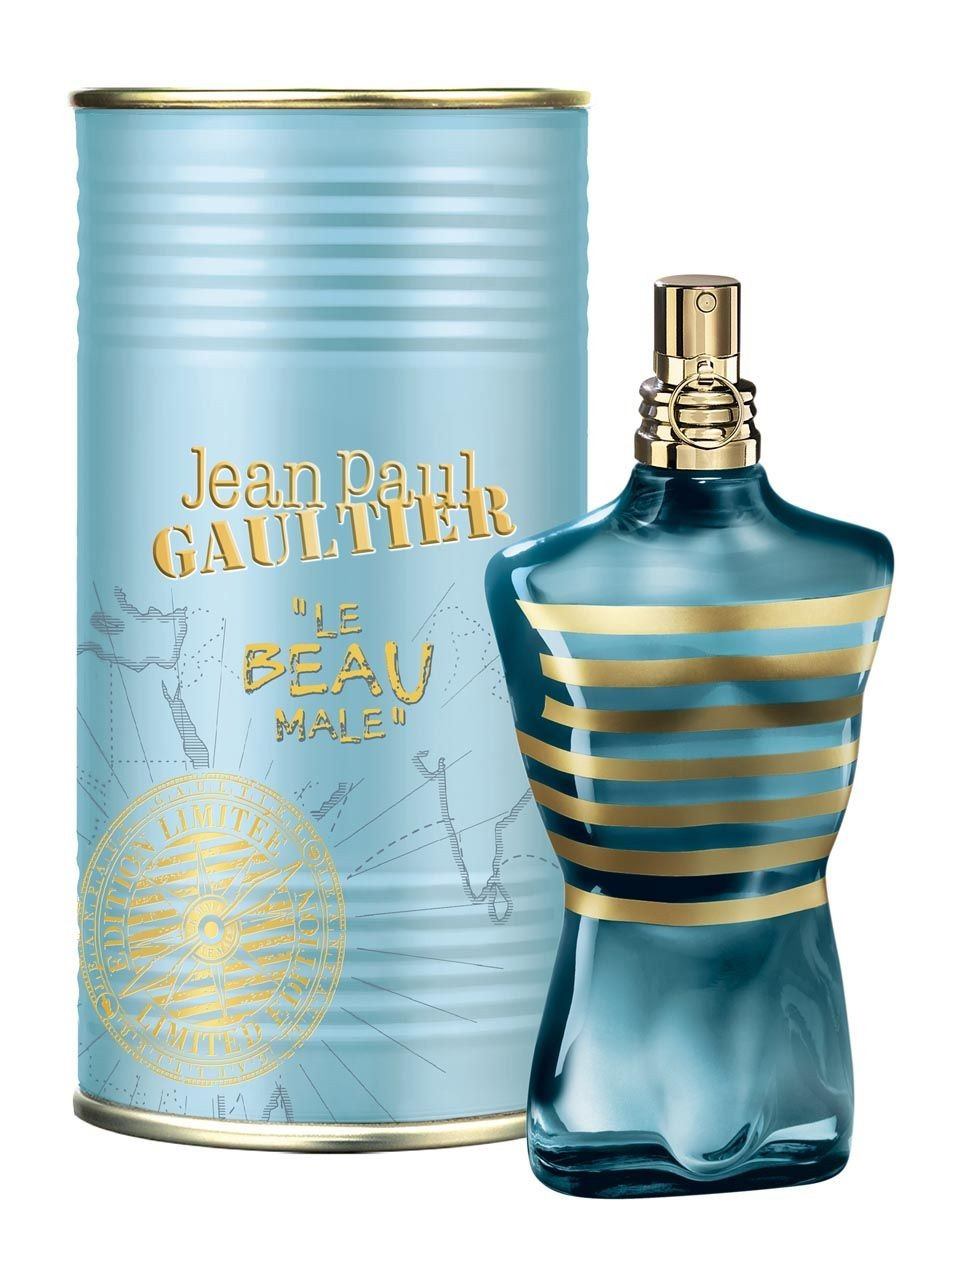 Buy Jean Paul Gaultier Le Male perfume online at discounted price. –